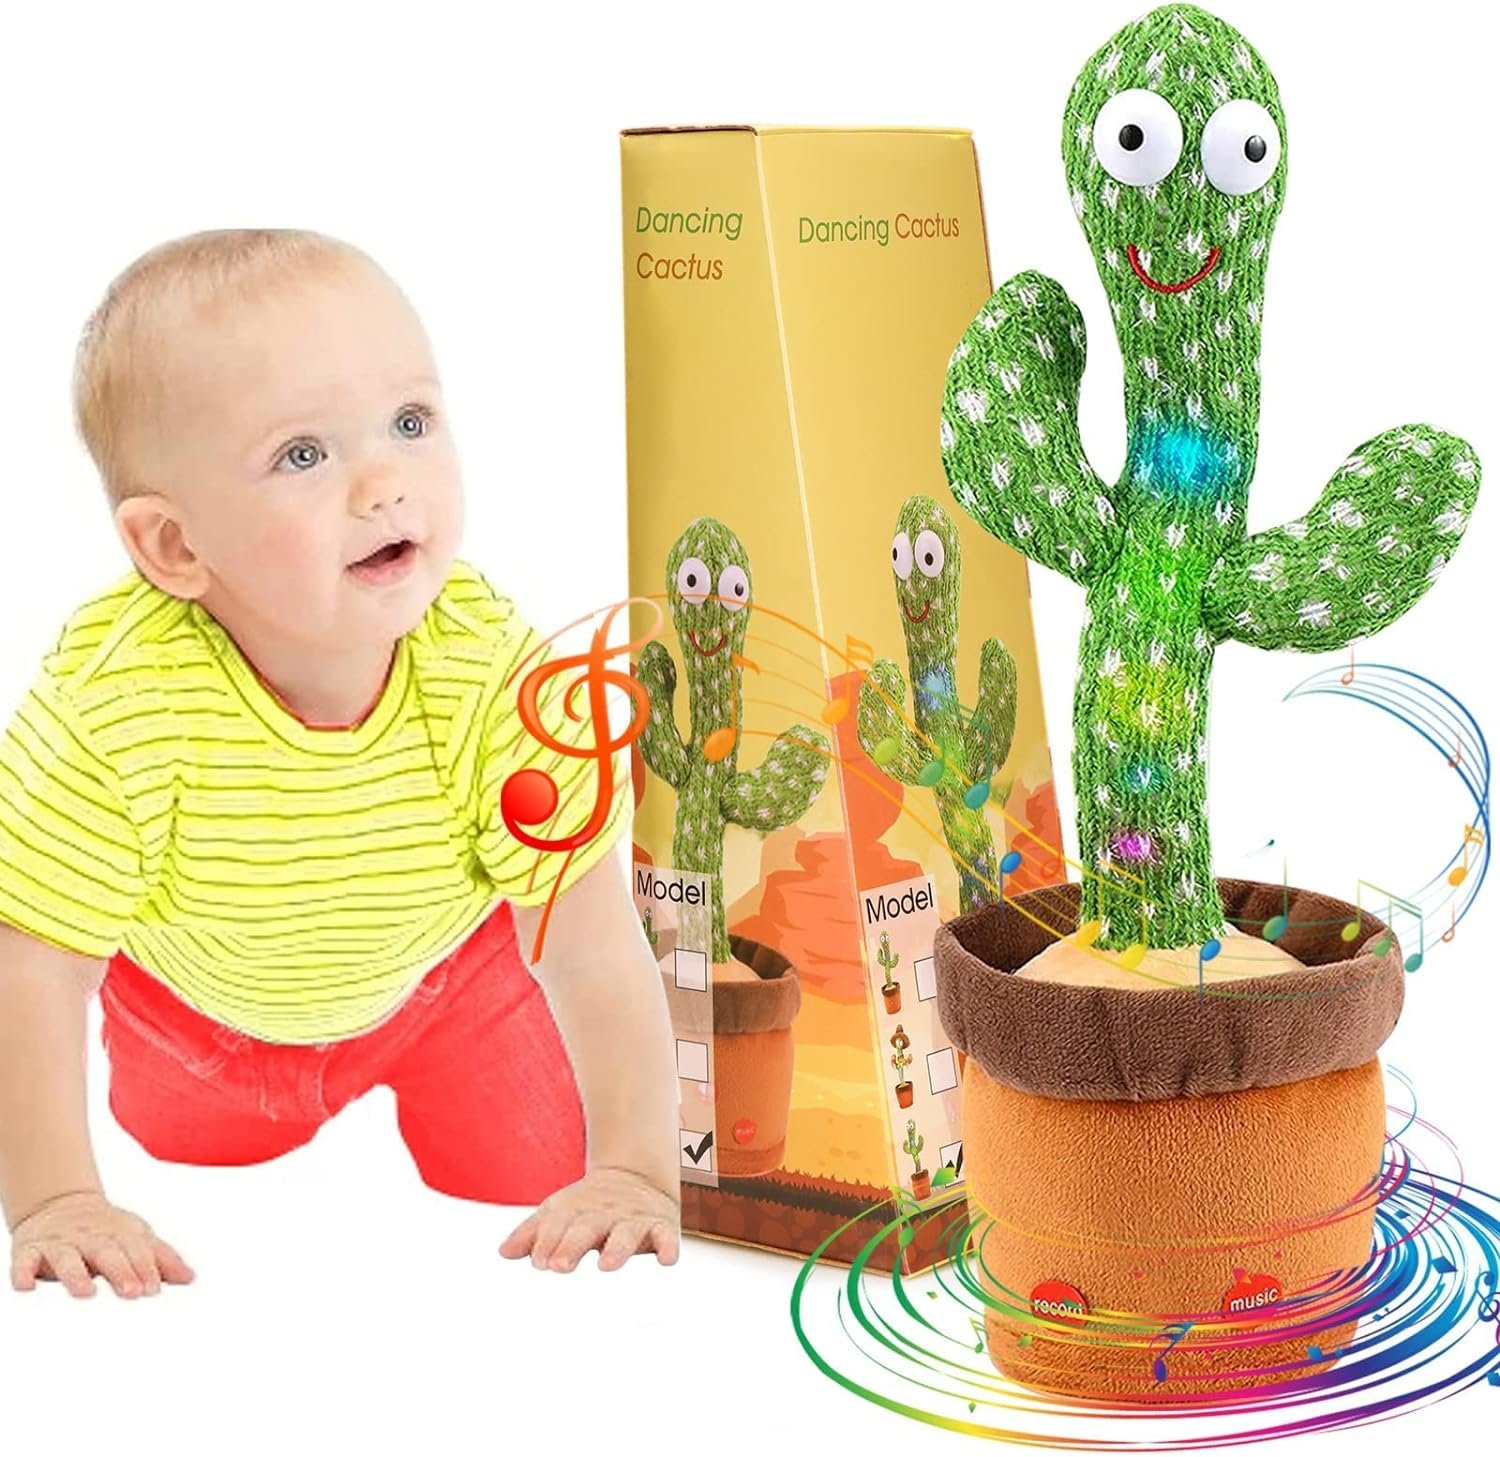 Emoin Dancing Cactus Toy Review